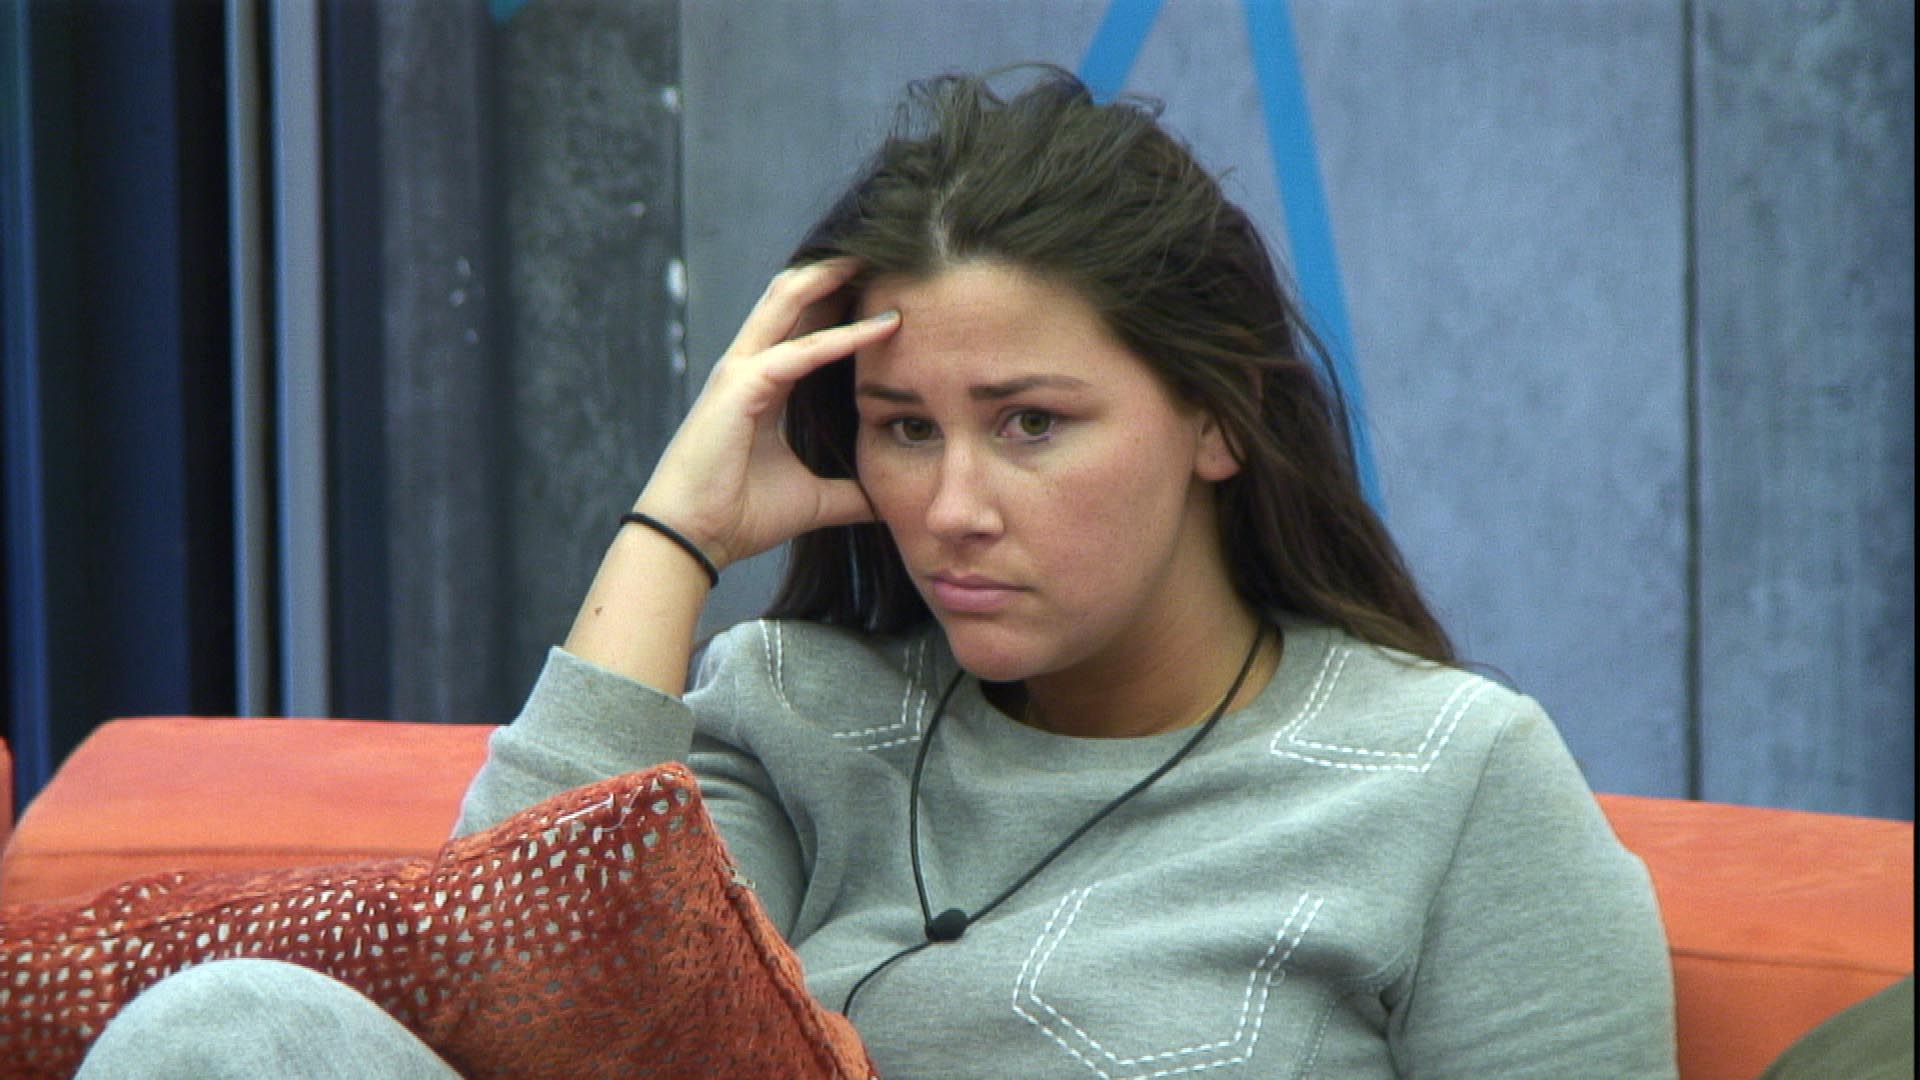 Day 56: C5 confirm Chloe nomination in latest cashbomb